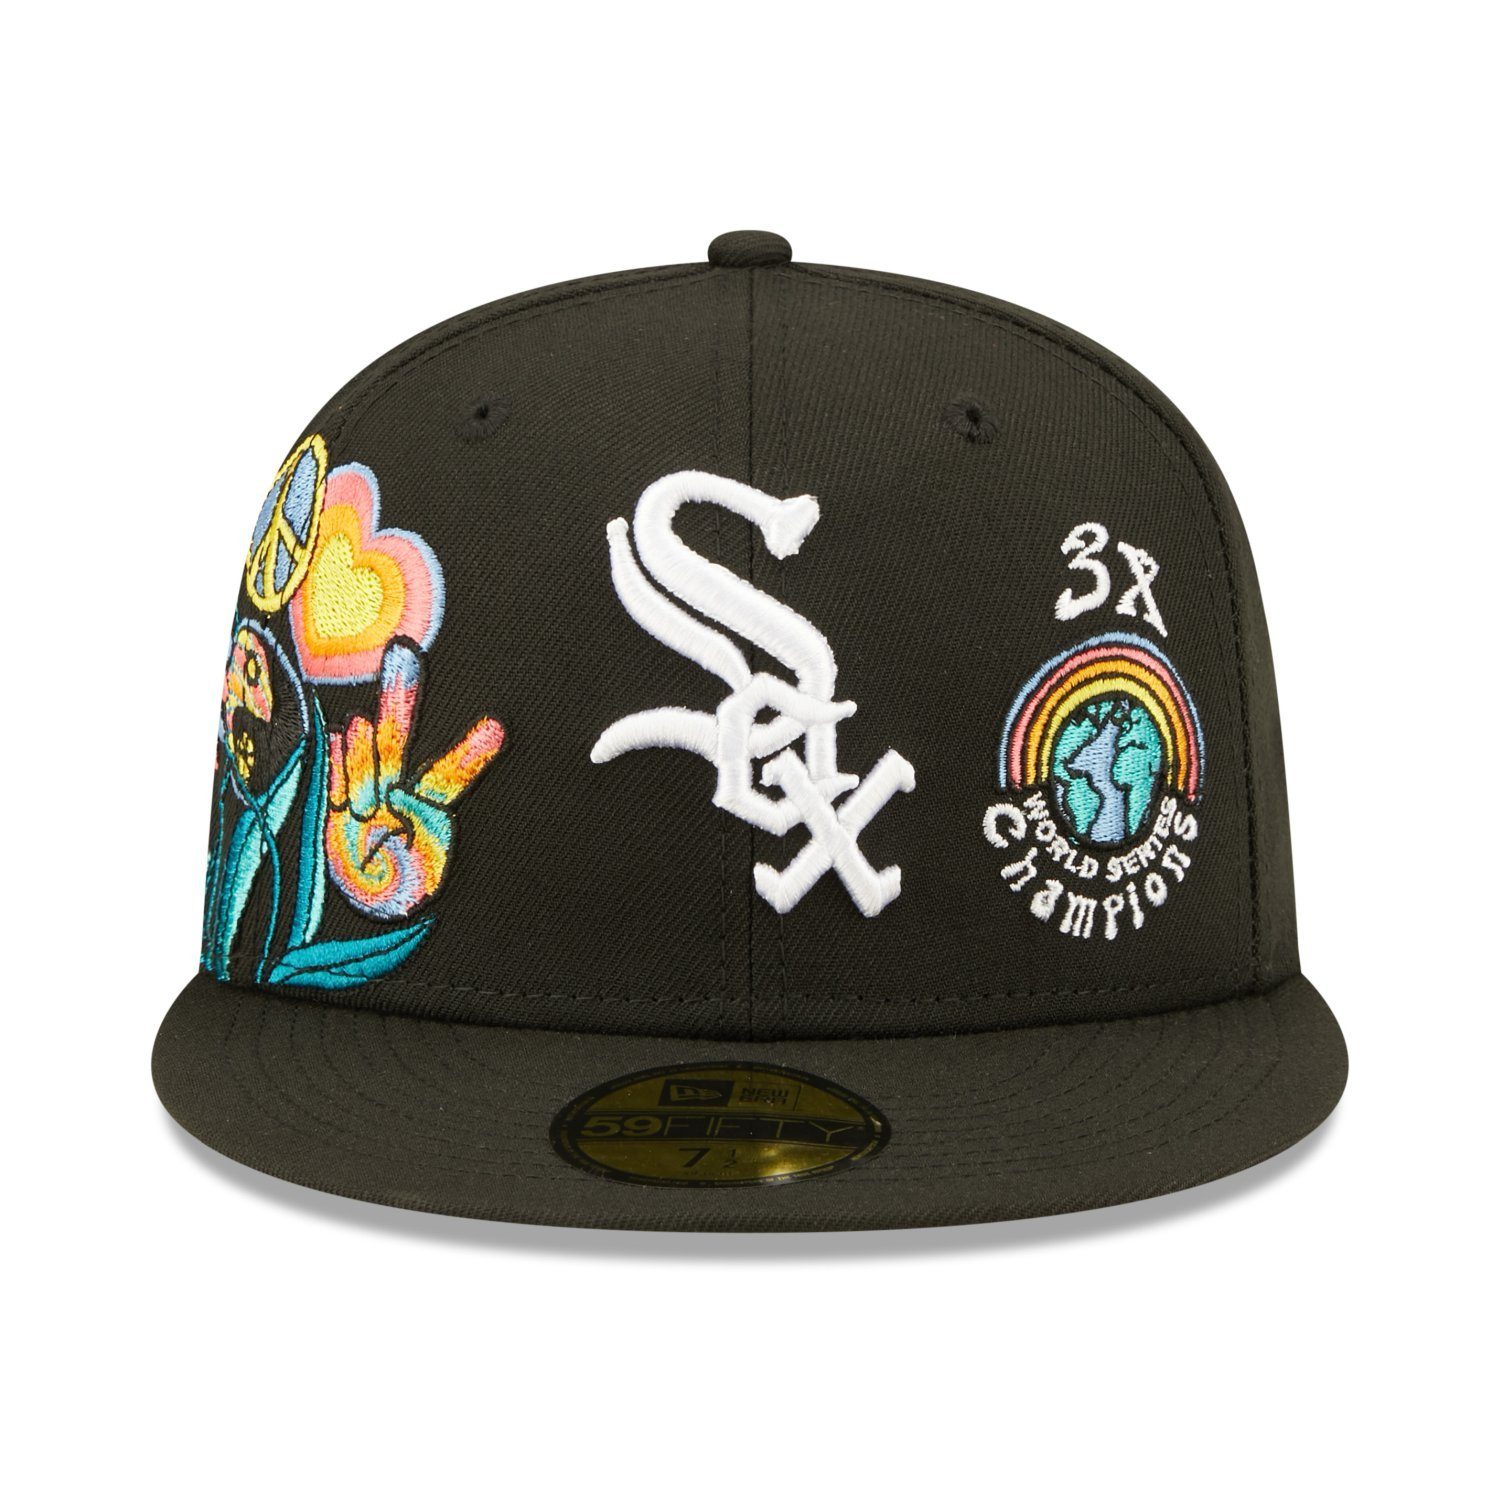 Fitted New Chicago 59Fifty Sox Era GROOVY Cap White